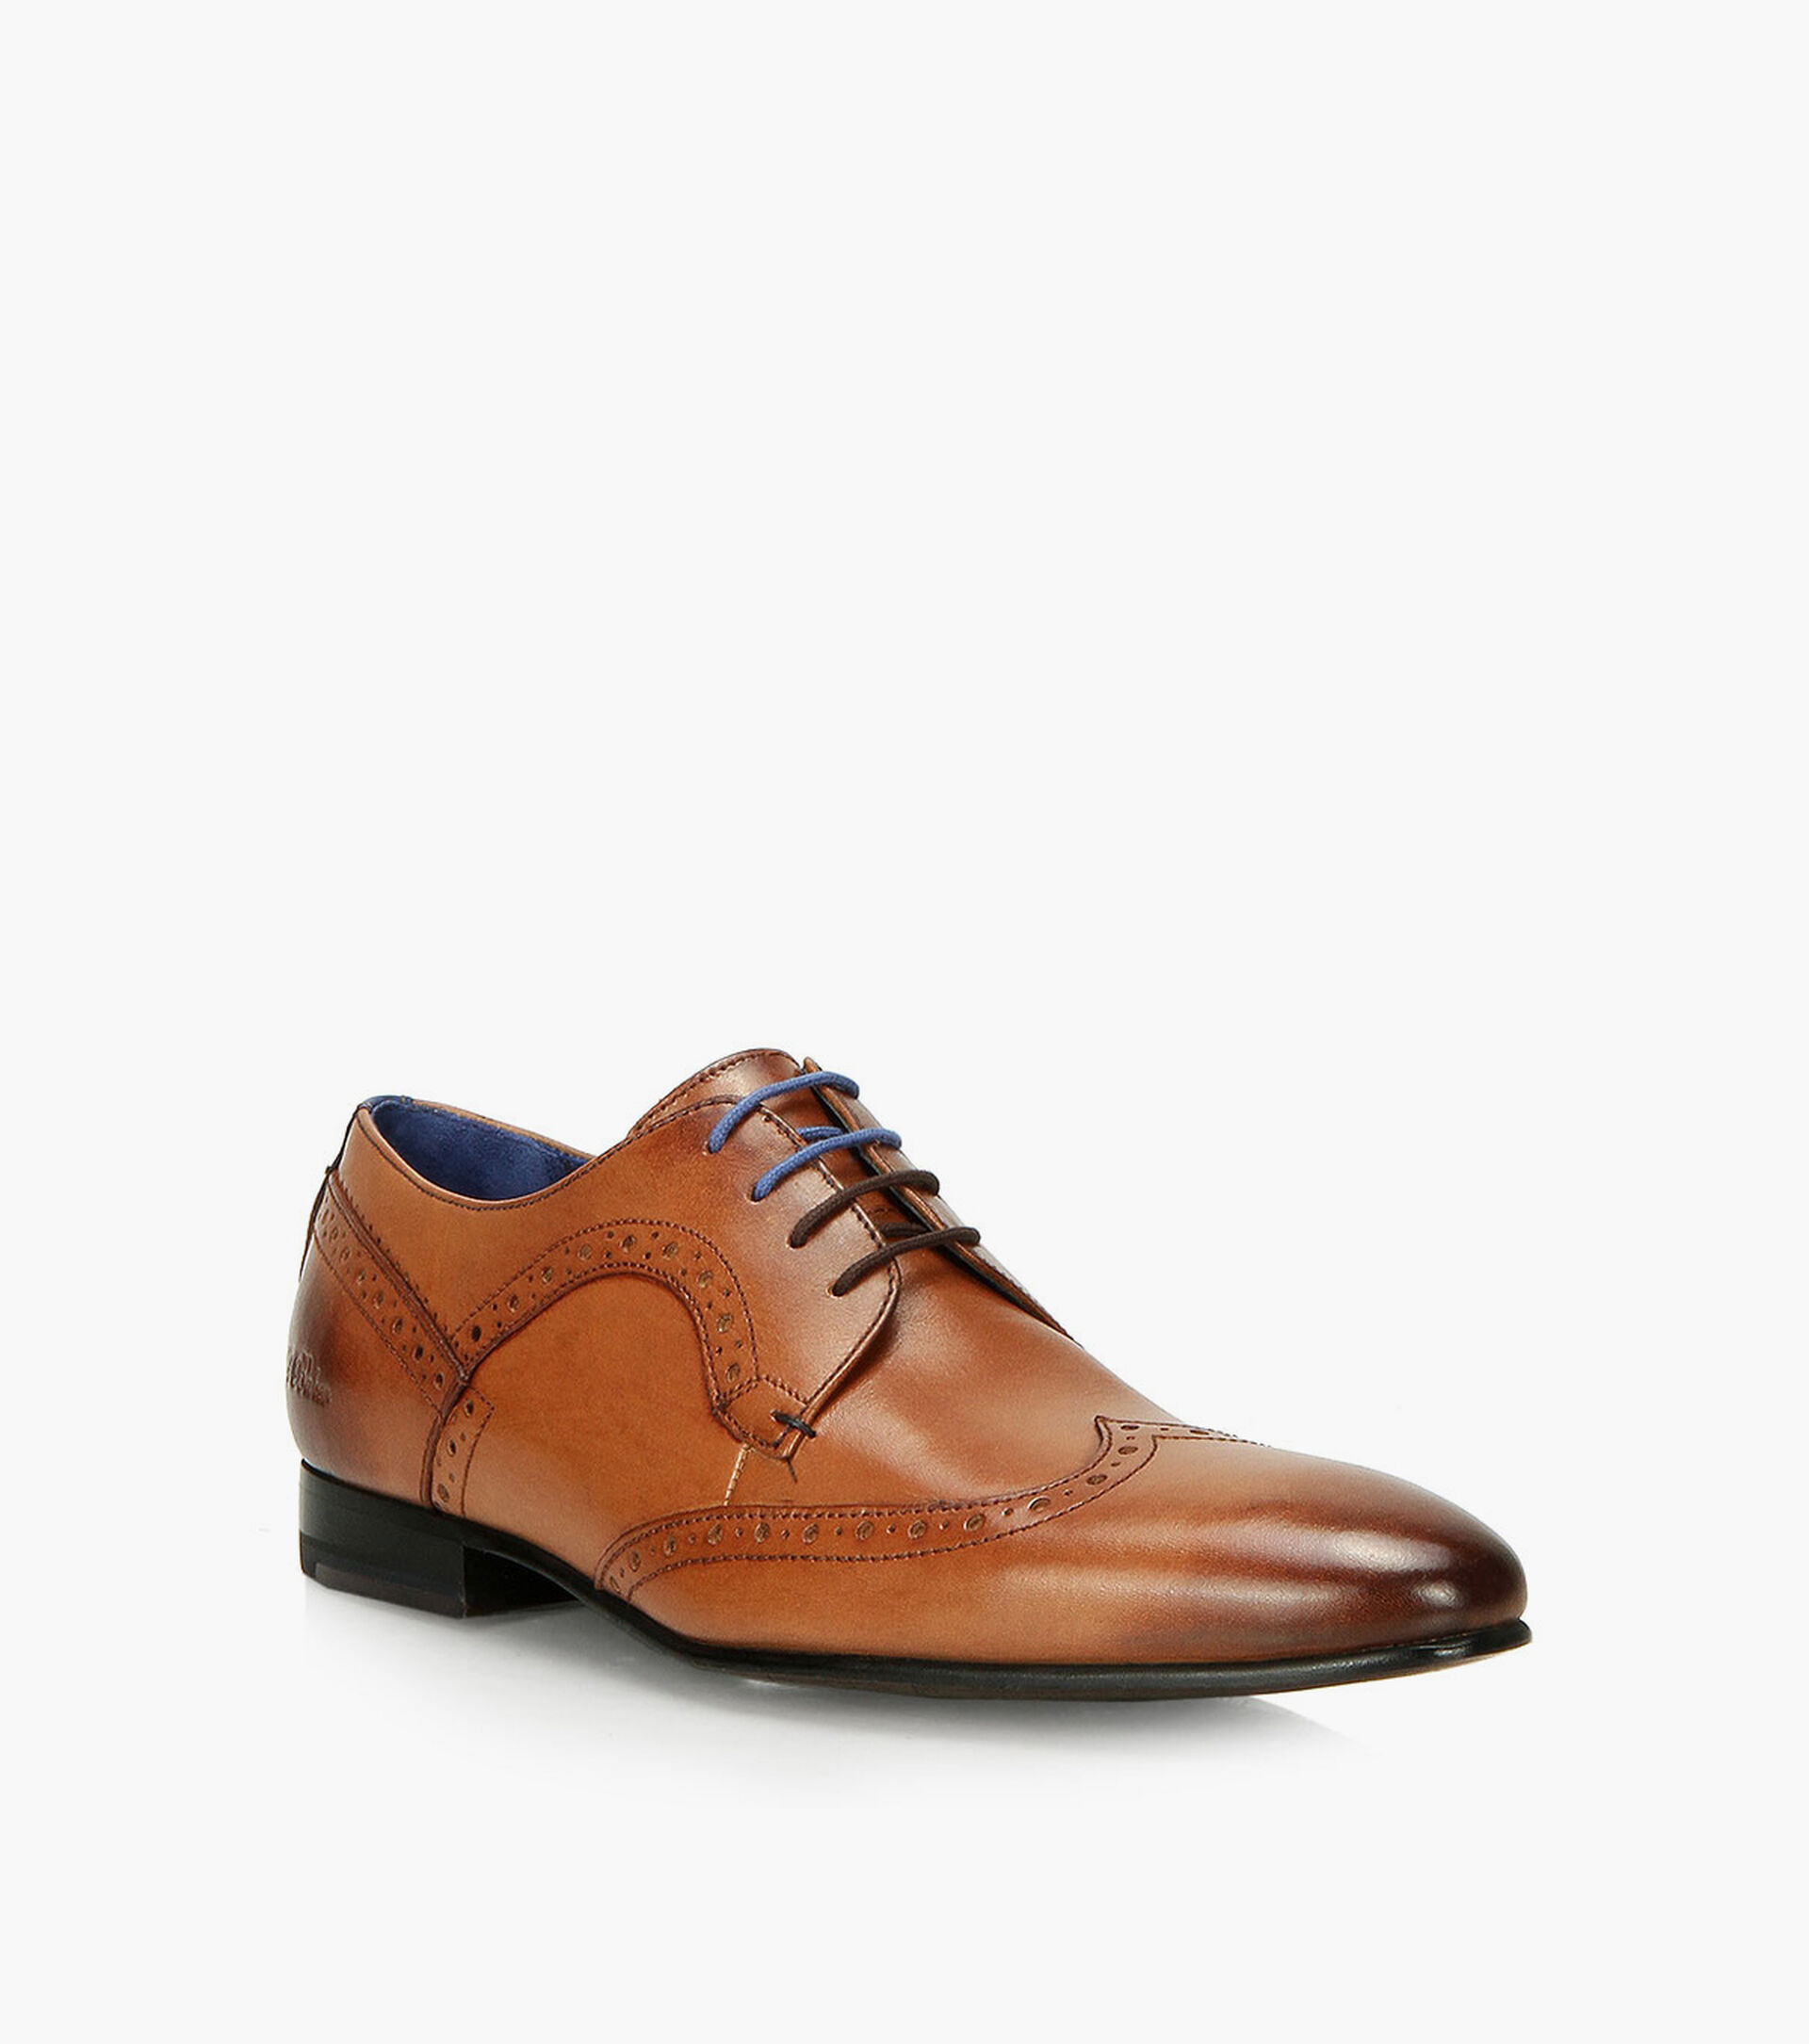 TED BAKER OLLIVUR - Leather | Browns Shoes